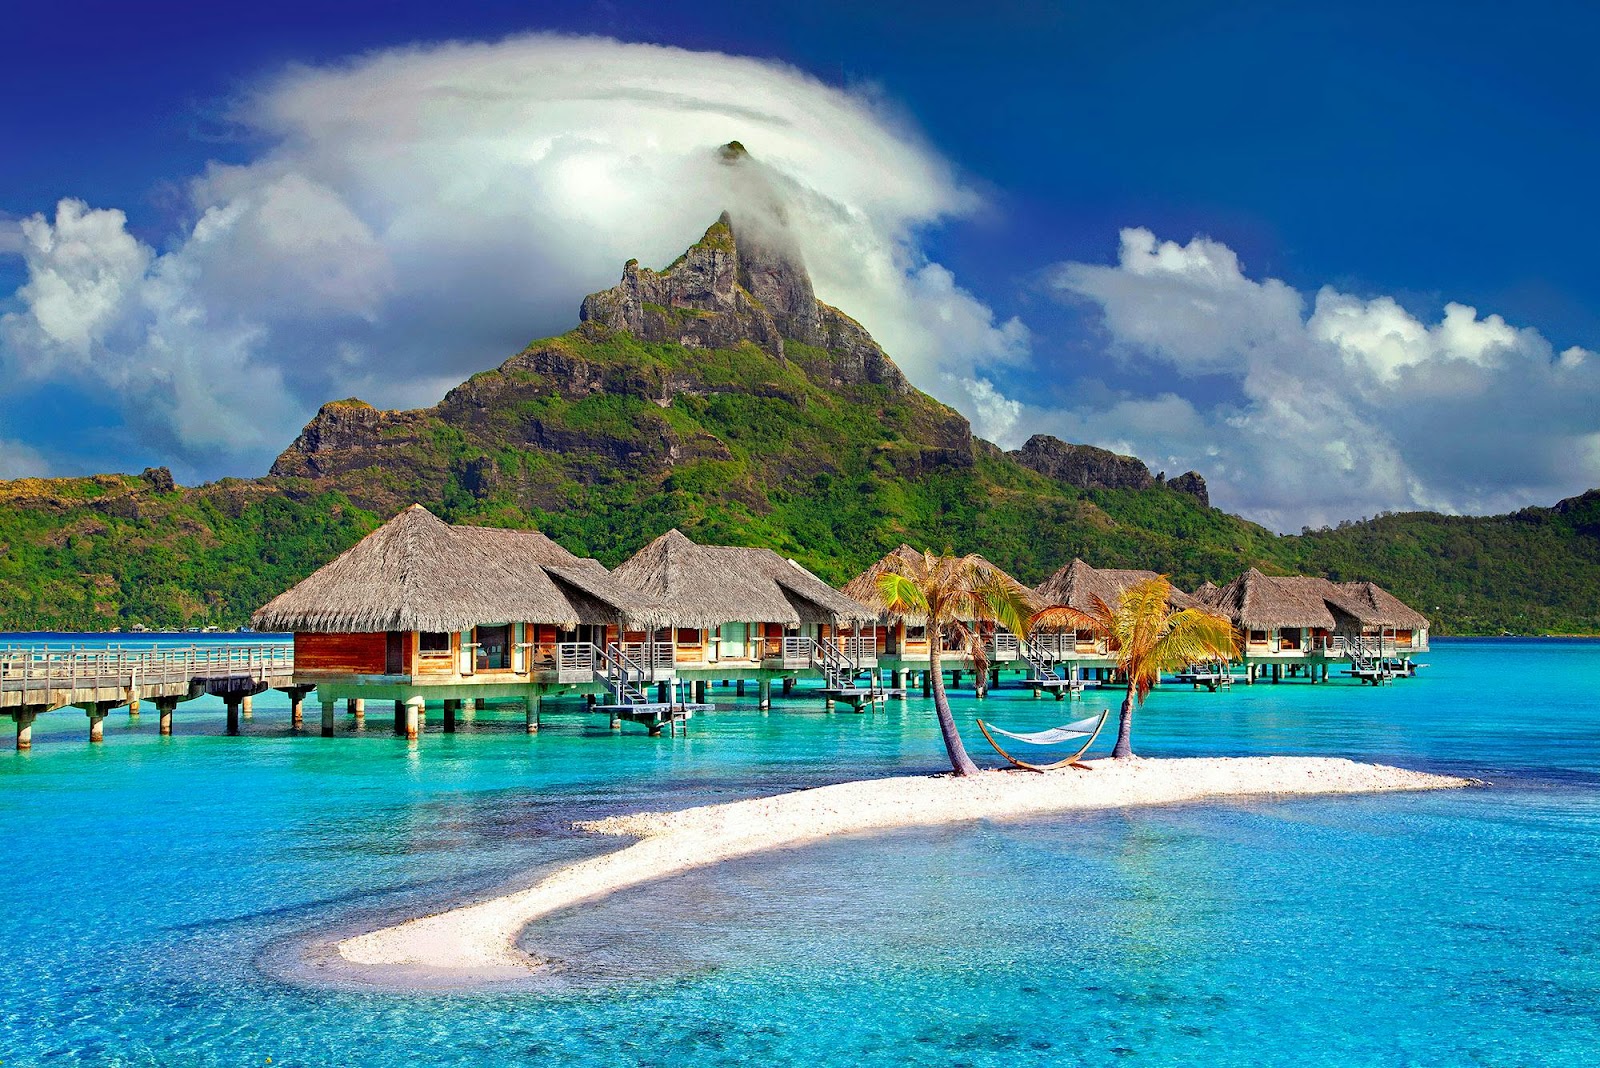 Stunning over-the-water bungalows with clear turquoise waters beneath.